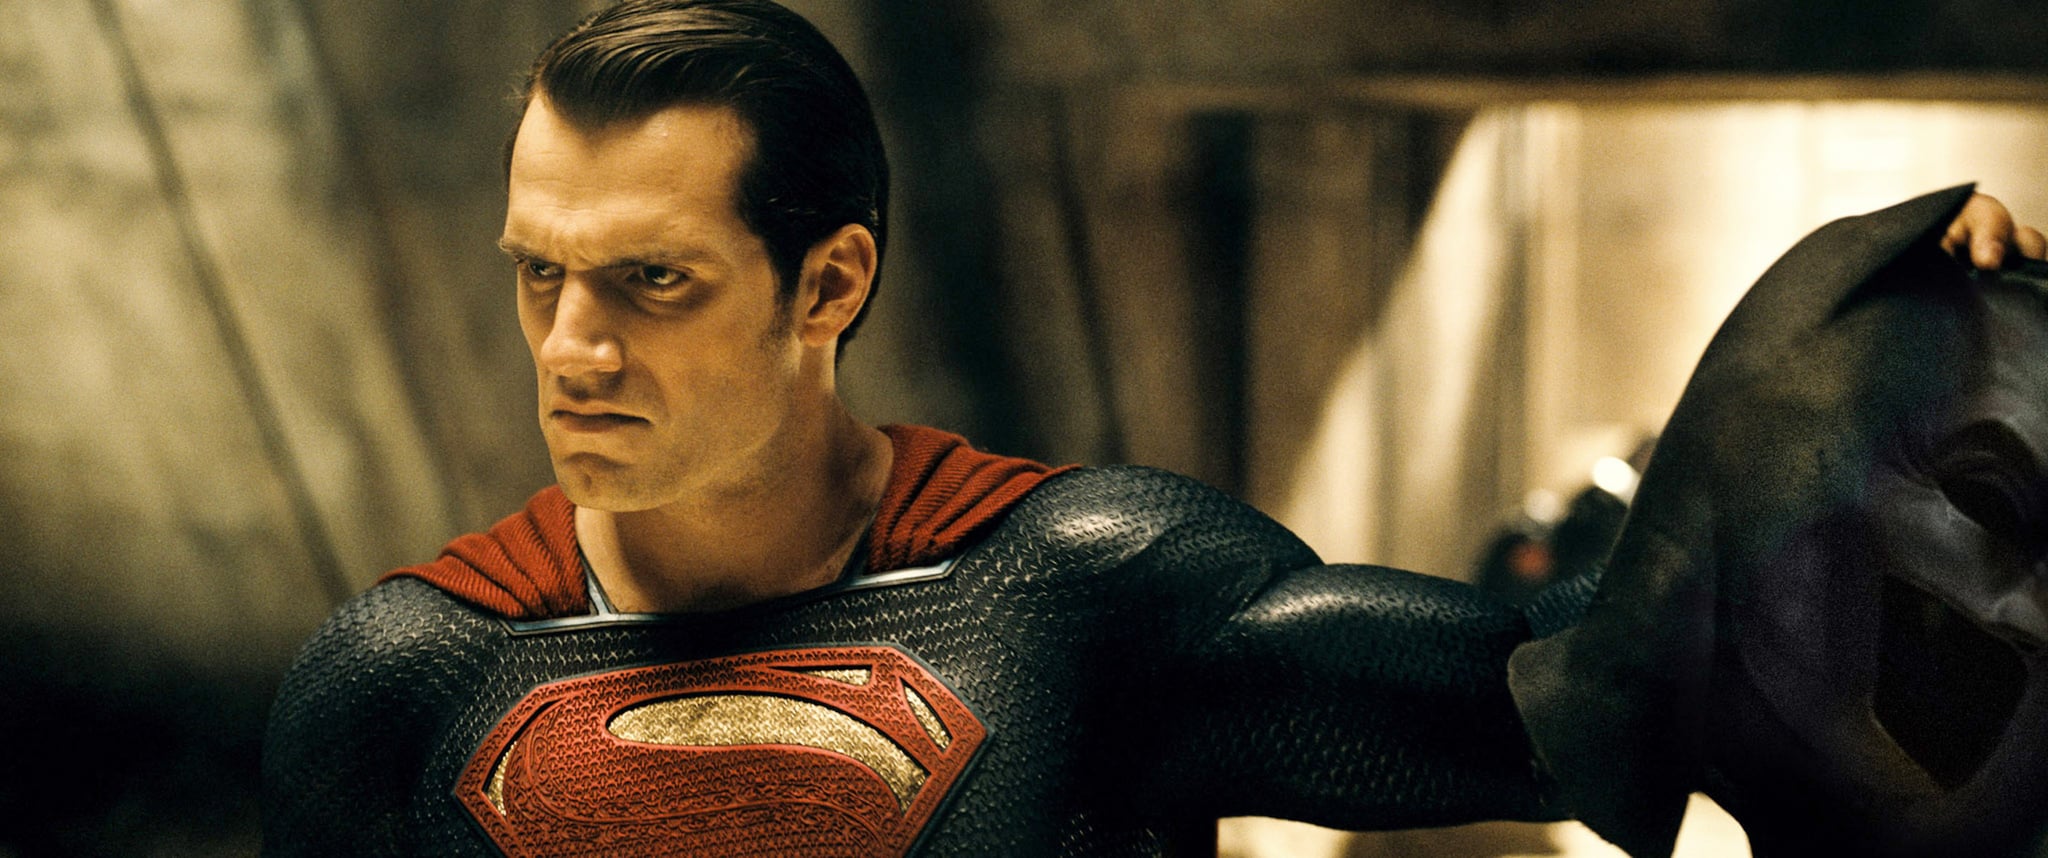 Henry Cavill Might Be Starring in the Long-Awaited “Man of Steel 2”